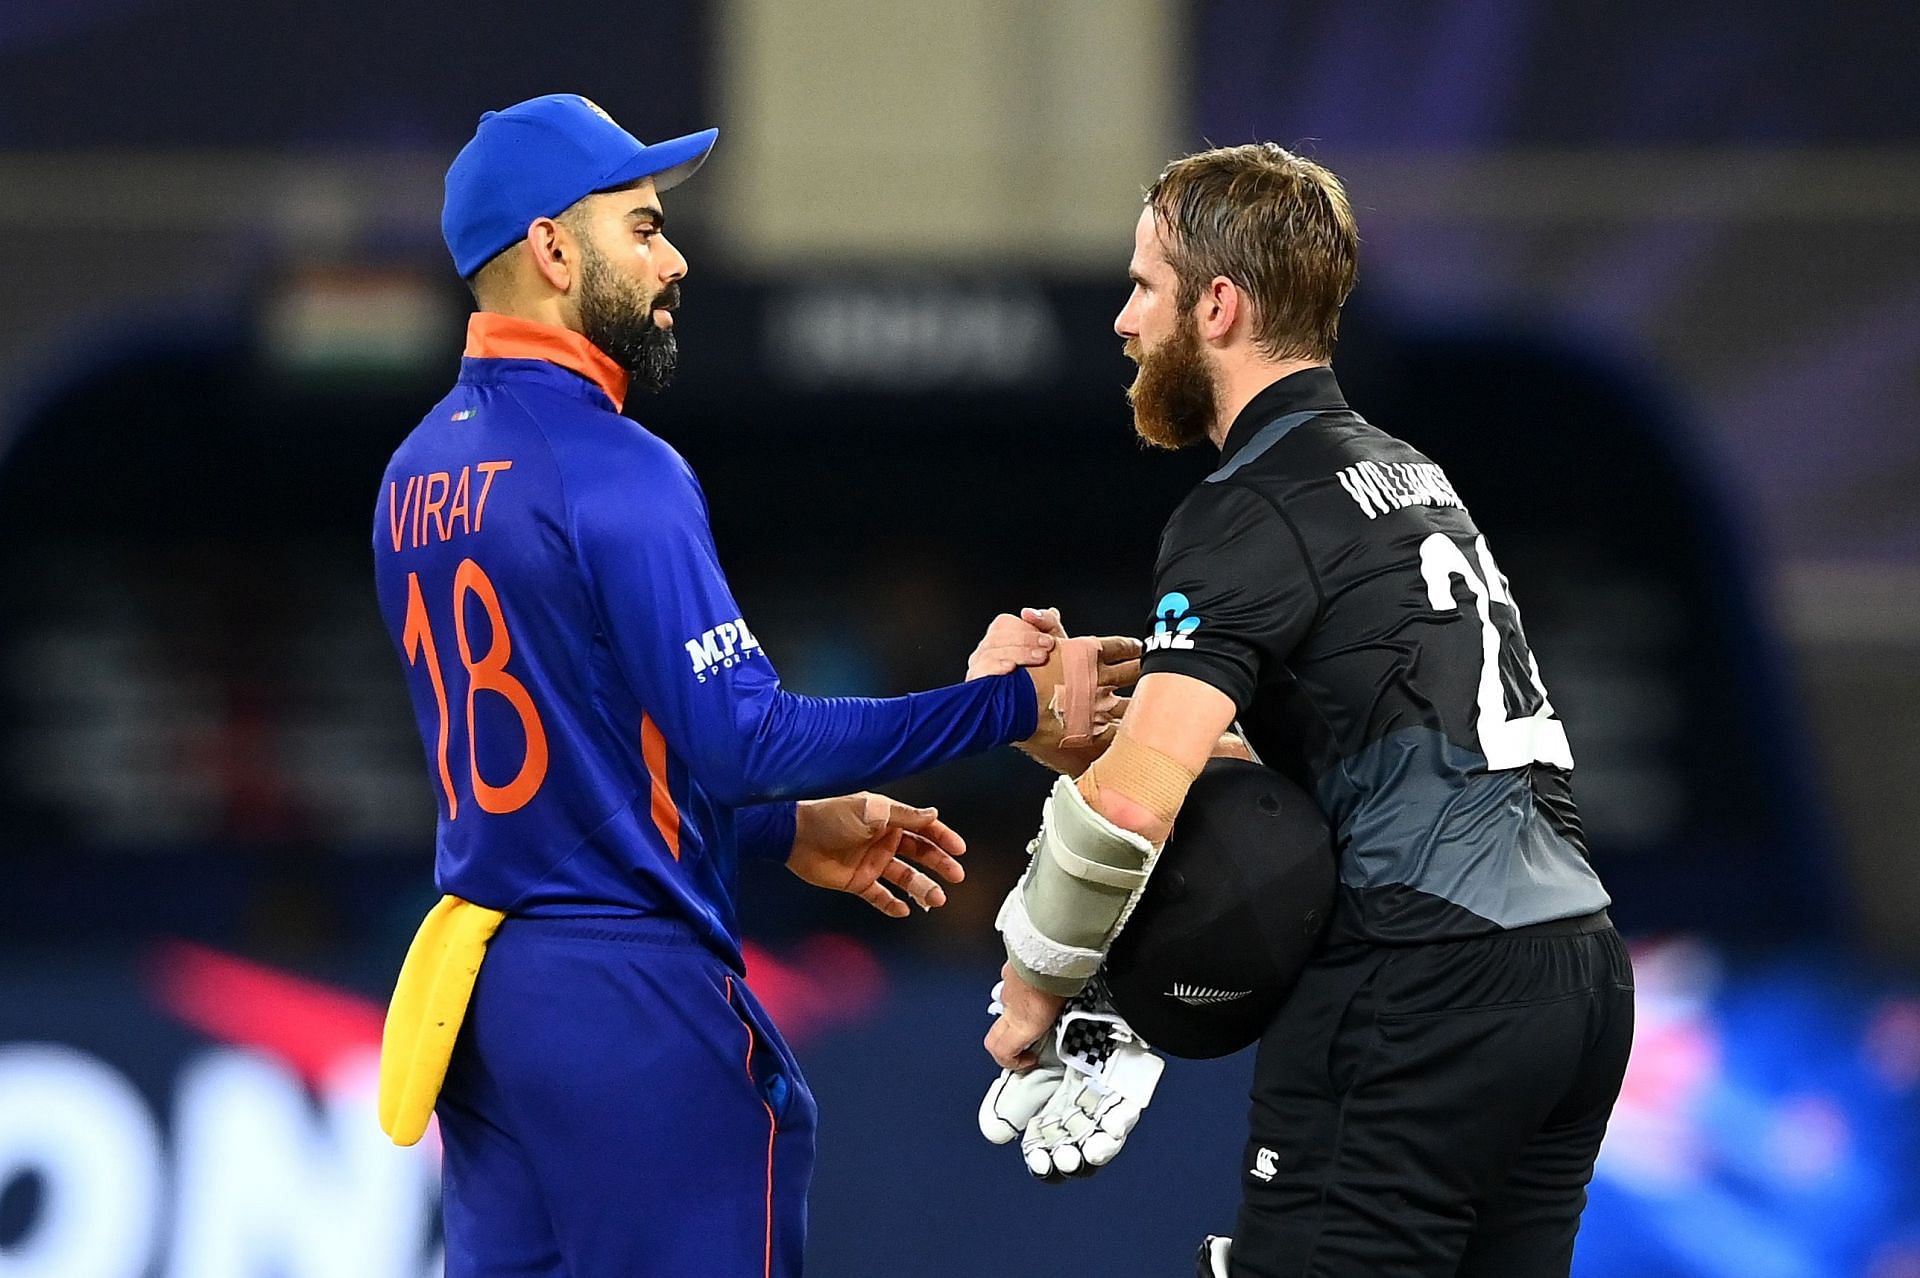 India will have an opportunity to avenge their previous defeats against New Zealand soon